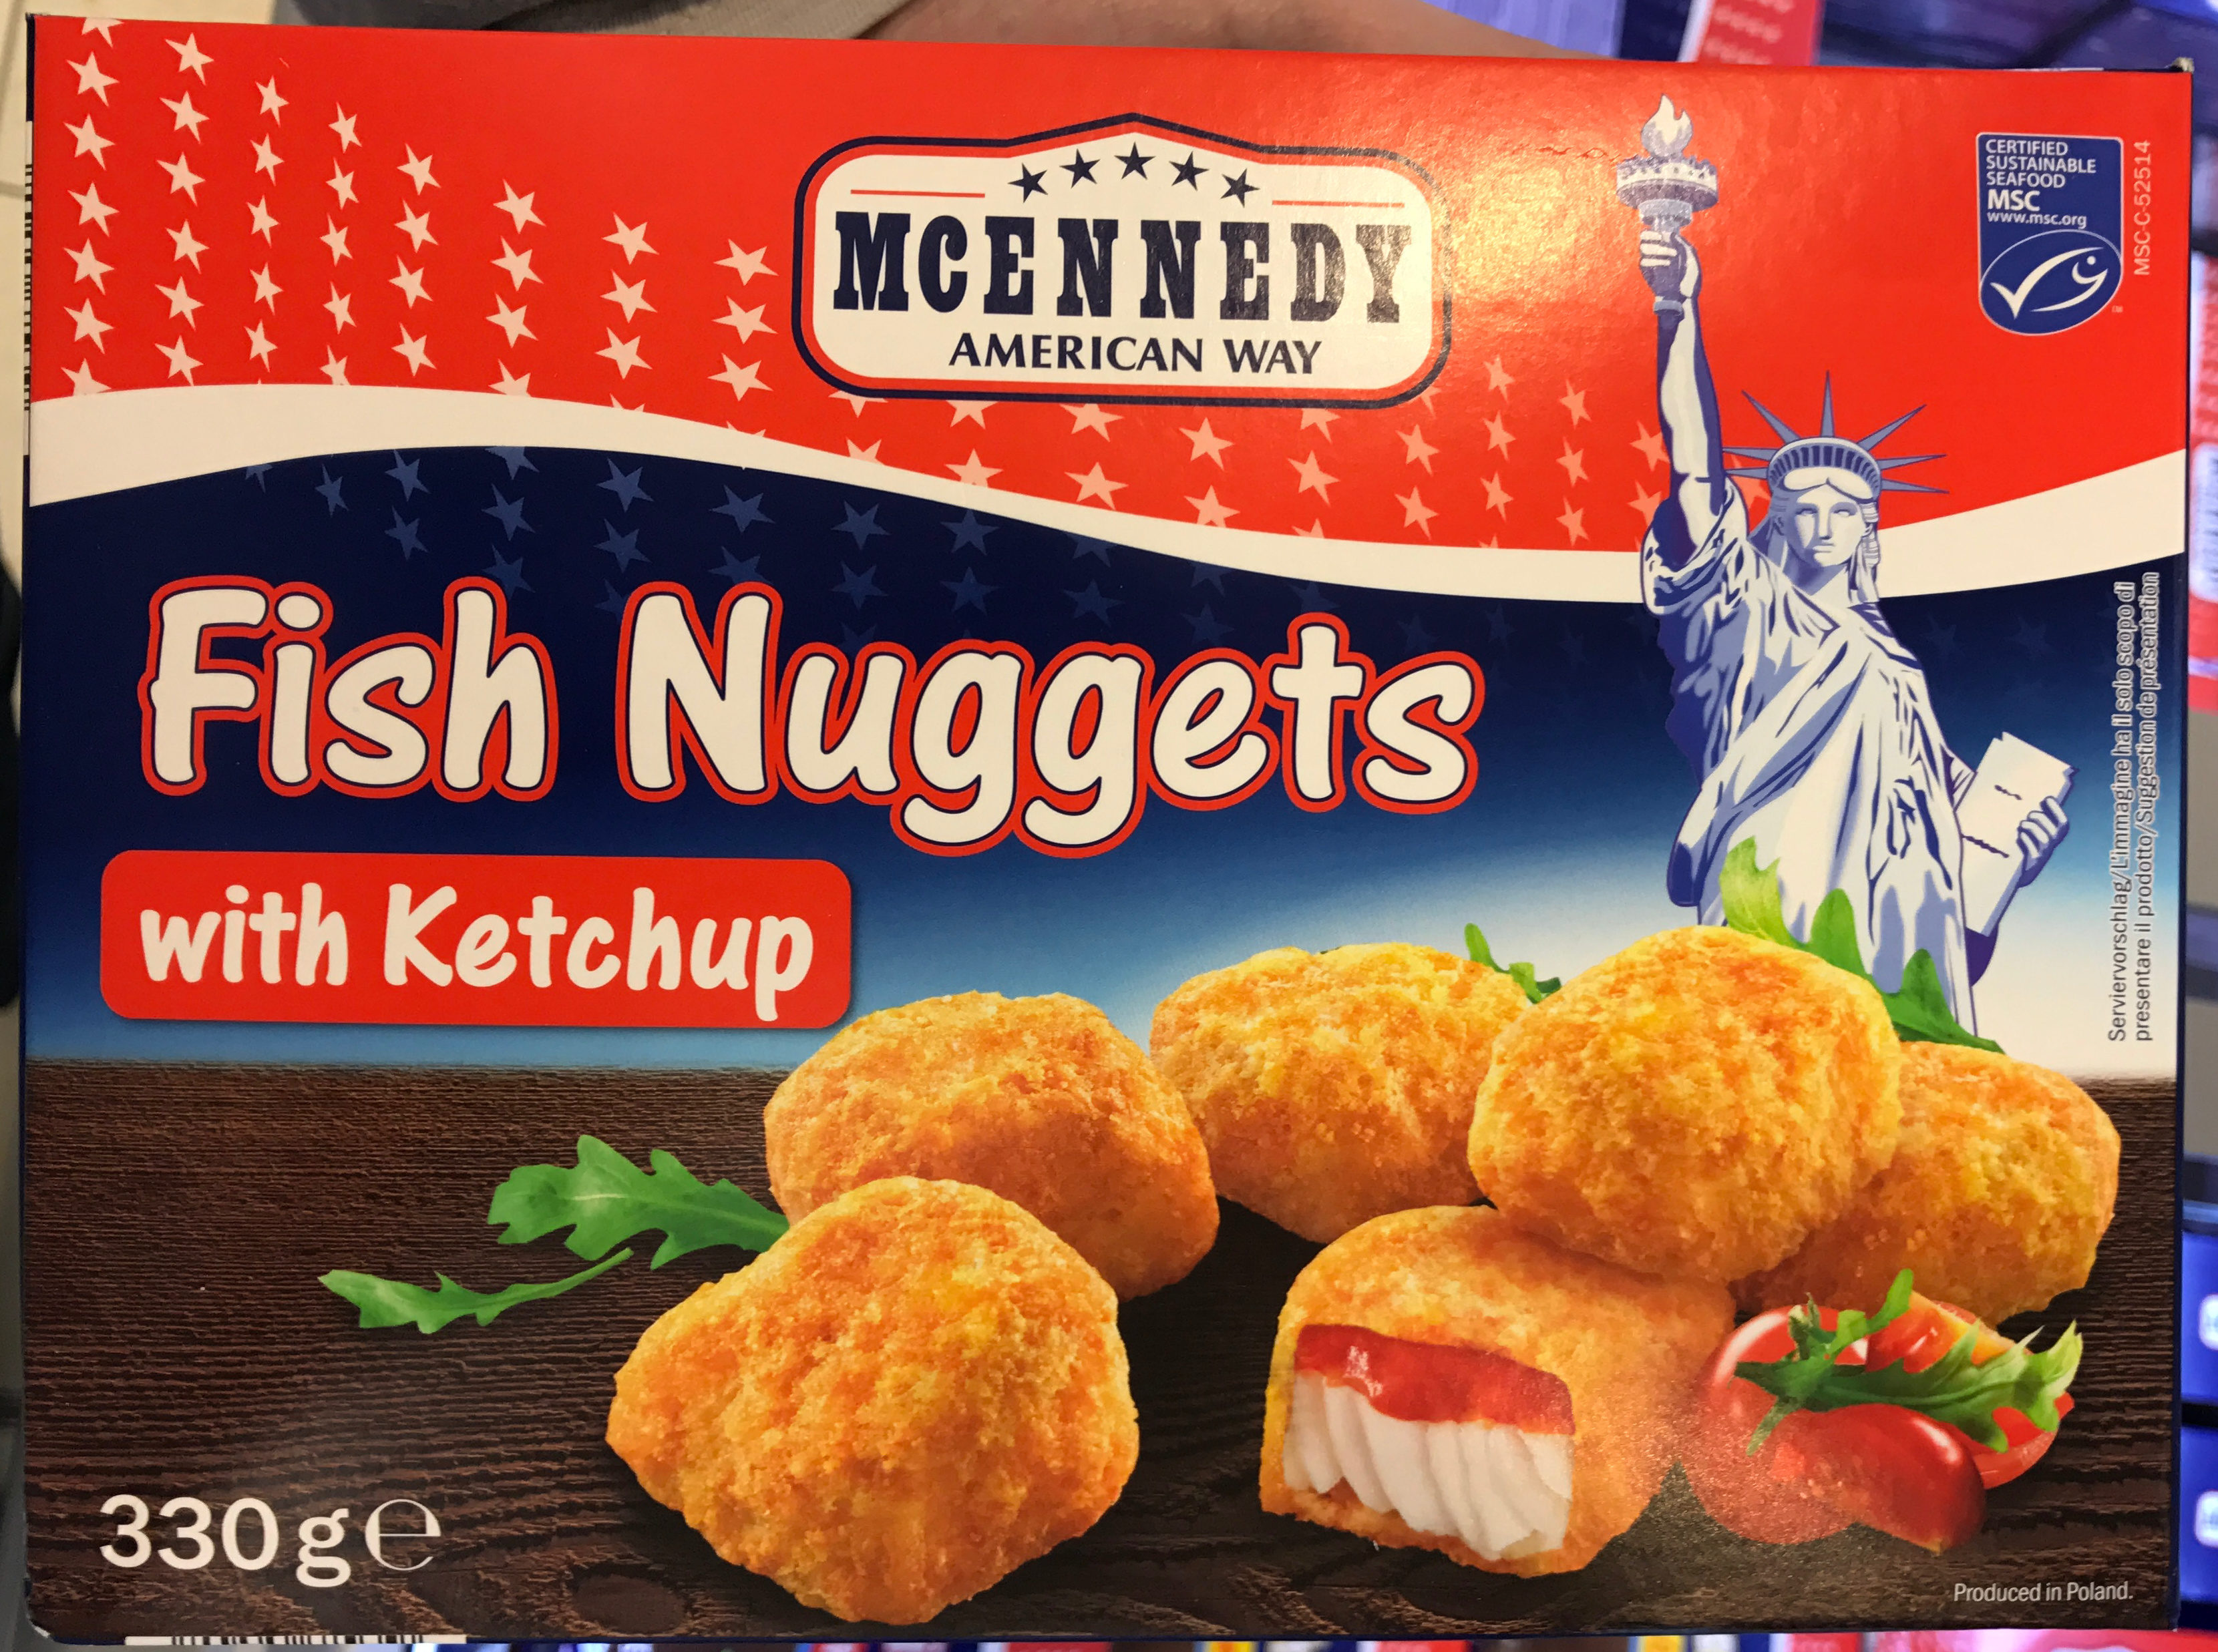 Fish Nuggets with Ketchup - McEnnedy - 330 g